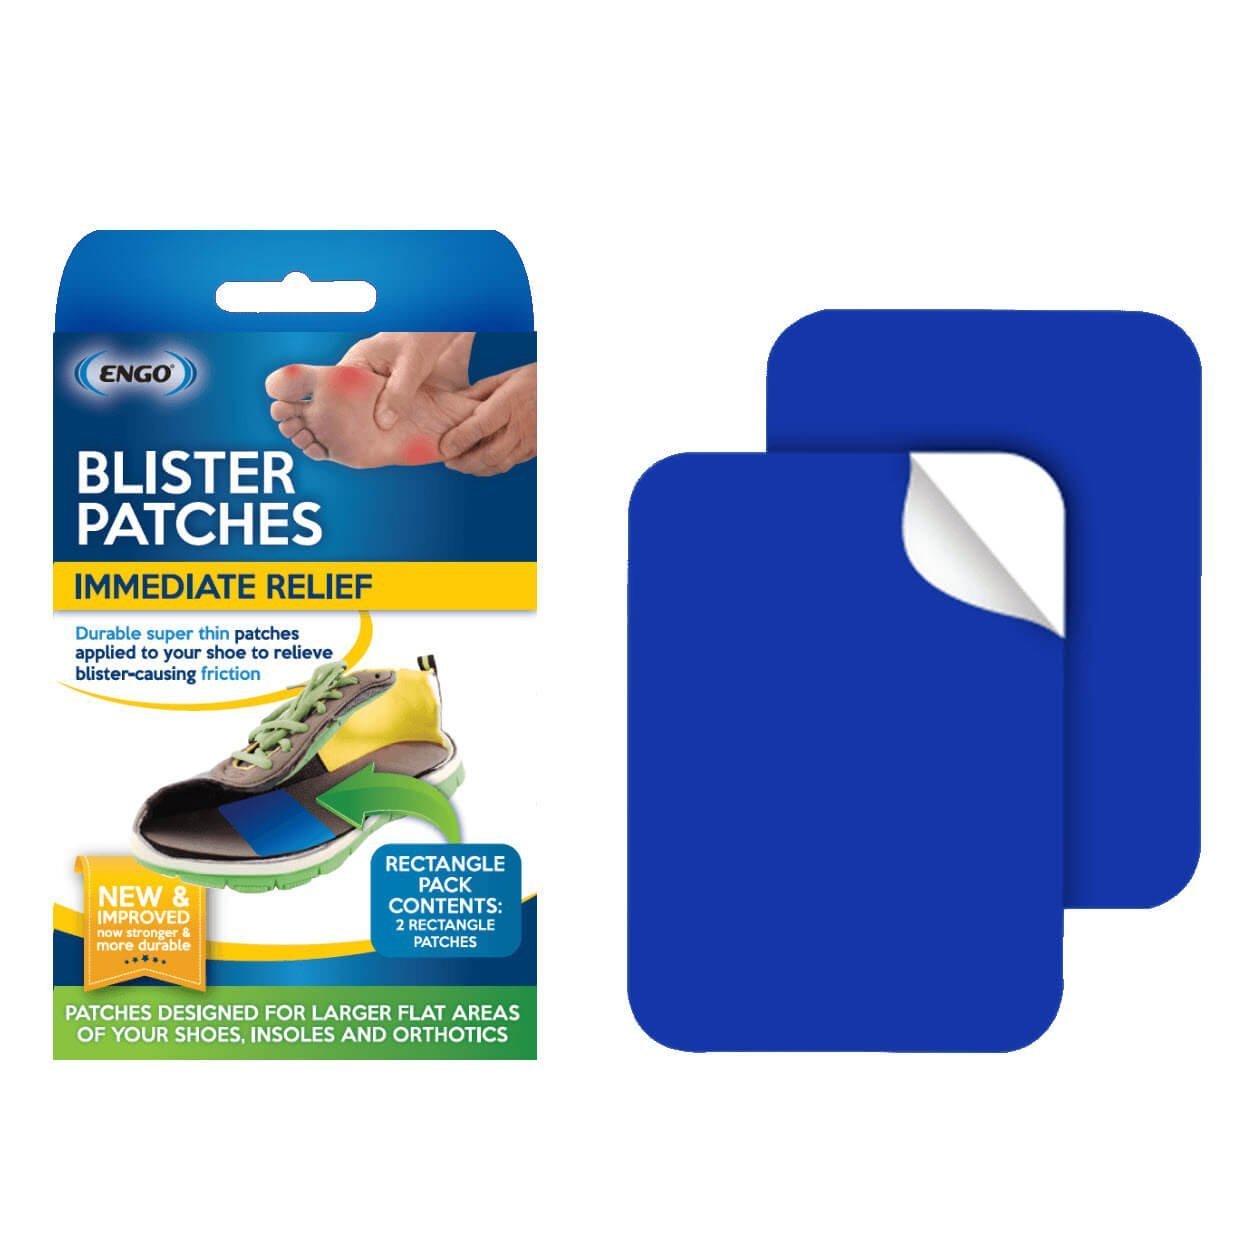 ENGO Blister Patches Rectangle Pack contains 2 ENGO Rectangle Patches